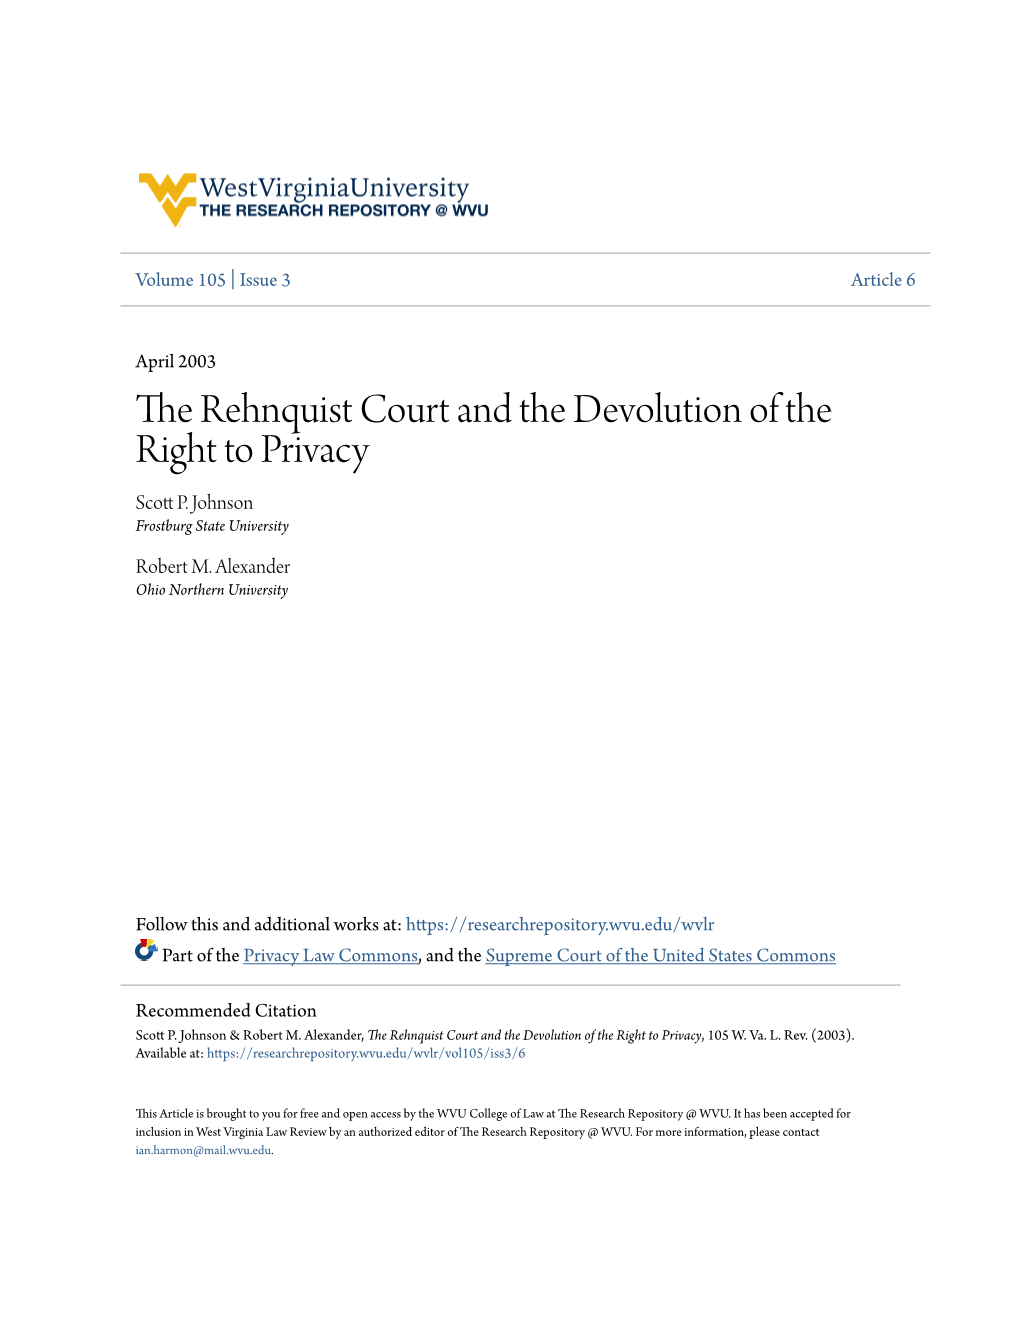 The Rehnquist Court and the Devolution of the Right to Privacy Scott .P Johnson Frostburg State University